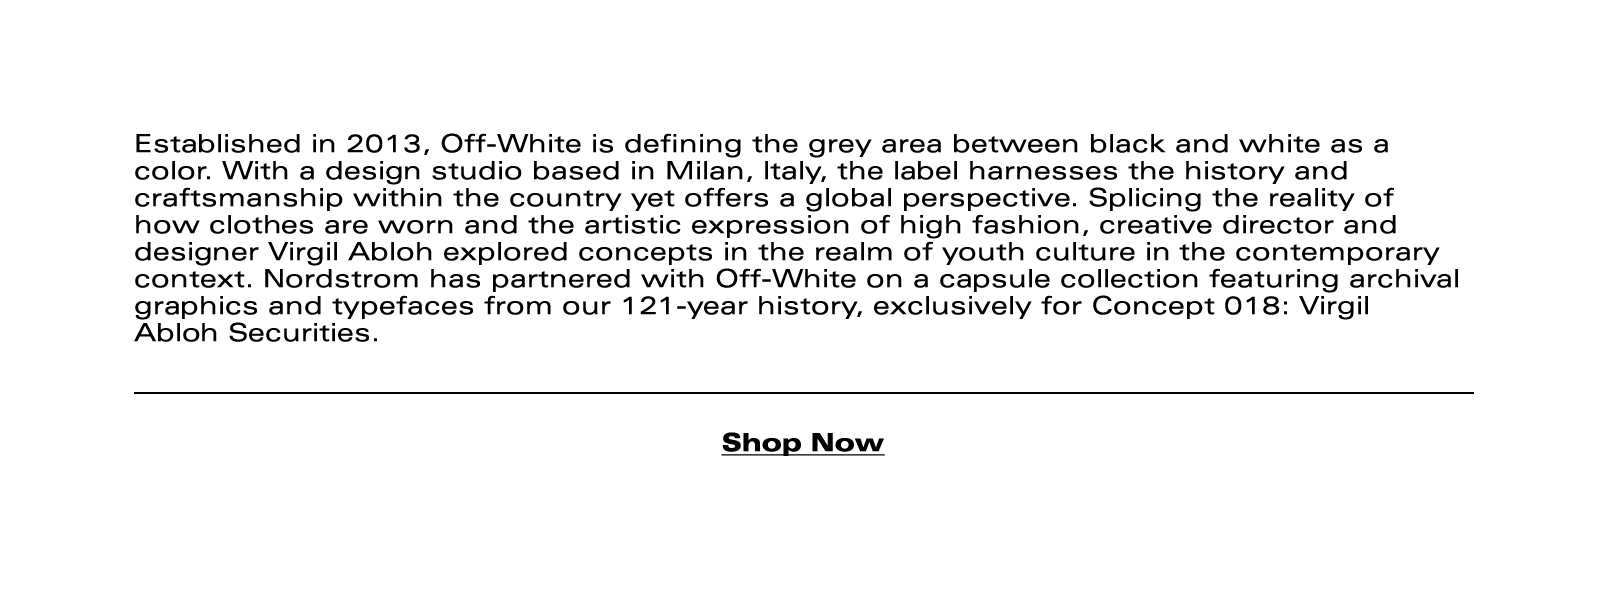 Established in 2013, Off-White is defining the grey area between black and white as a color. With a design studio based in Milan, Italy, the label harnesses the history and craftsmanship within the country yet offers a global perspective. Splicing the reality of how clothes are worn and the artistic expression of high fashion, creative director and designer Virgil Abloh explored concepts in the realm of youth culture in the contemporary context. Nordstrom has partnered with Off-White on a capsule collection featuring archival graphics and typefaces from our 121-year history, exclusively for Concept 018: Virgil Abloh Securities.